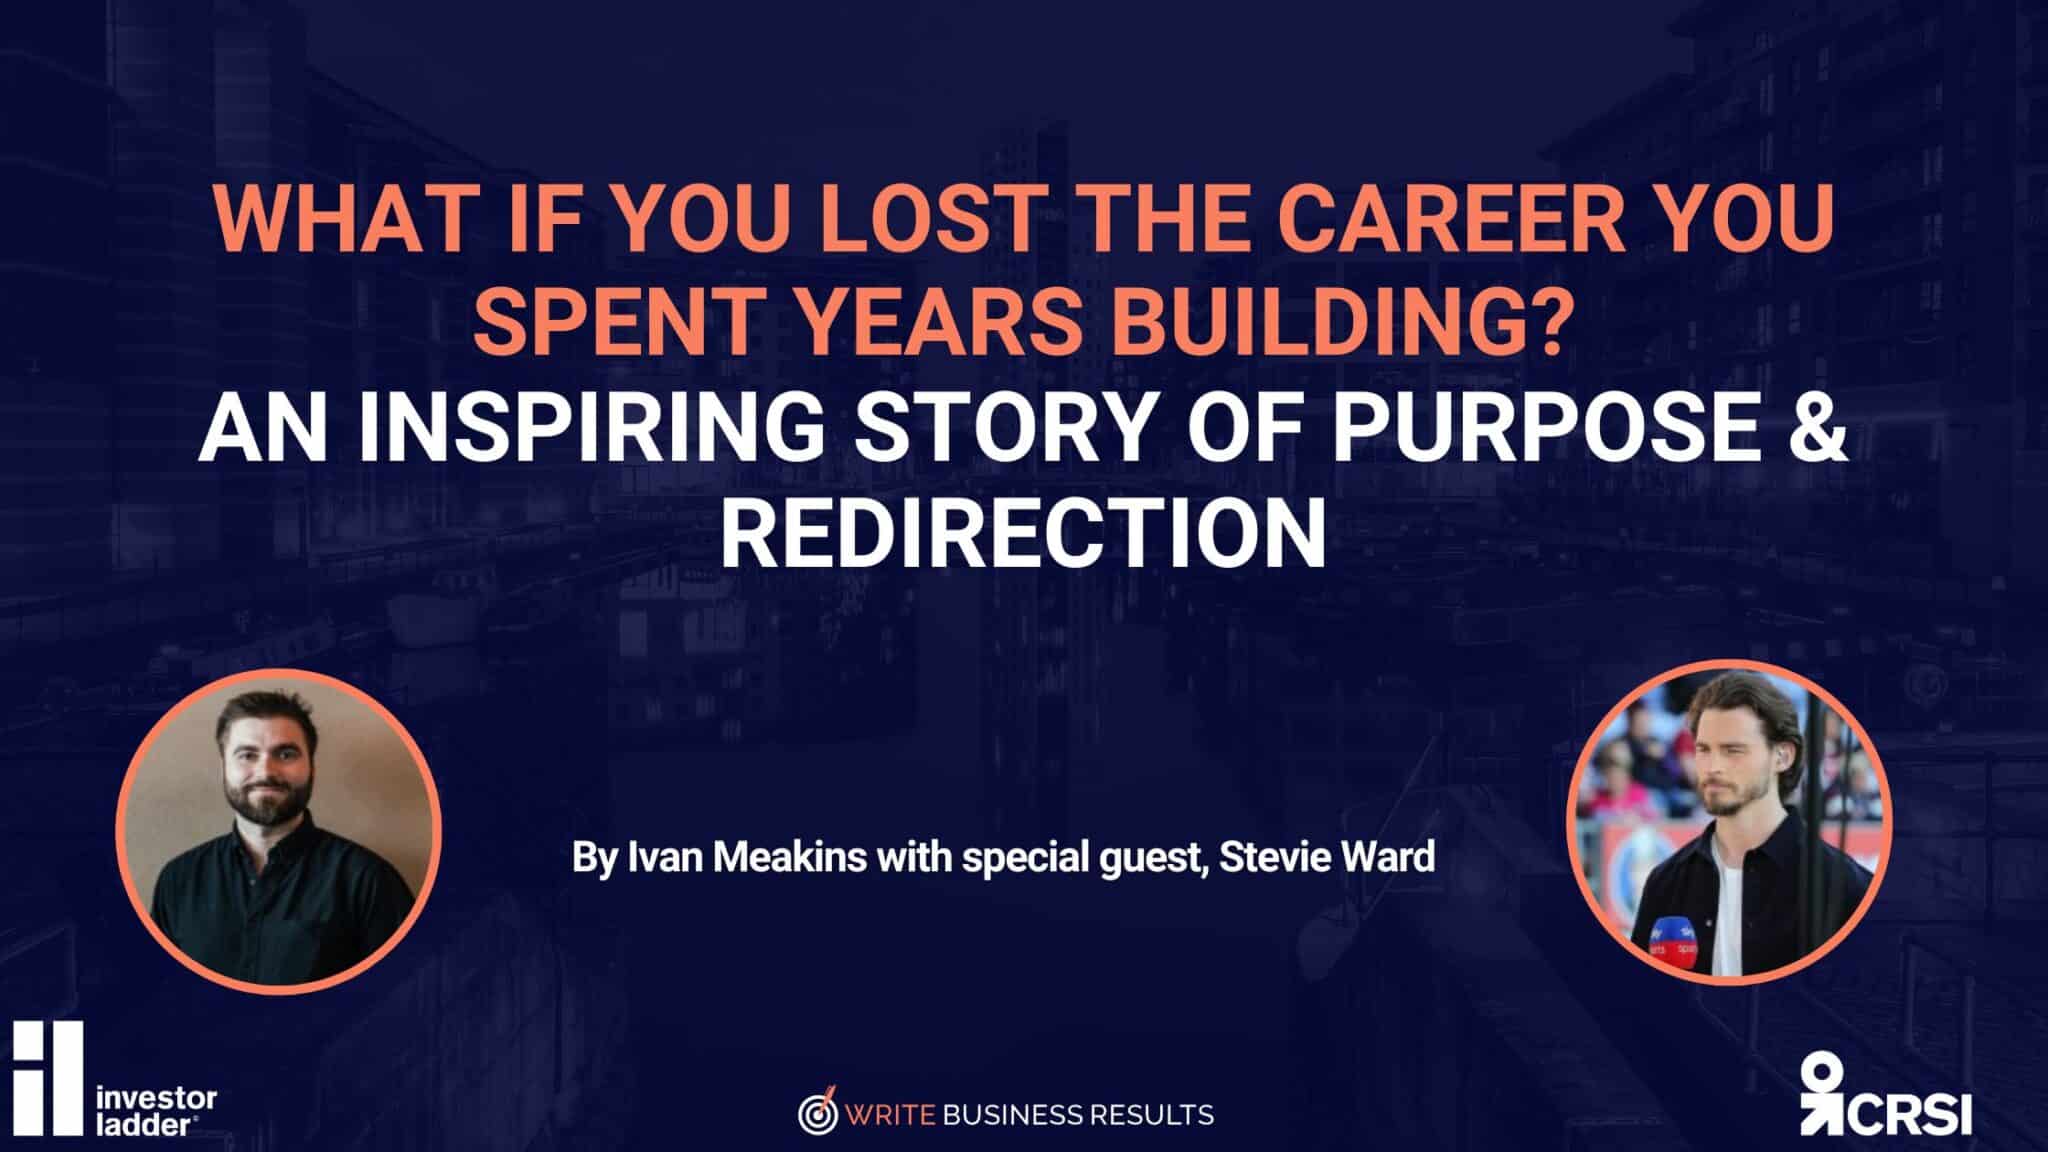 What If You Lost The Career You Spent Years Building? An Inspiring Story Of Purpose & Redirection